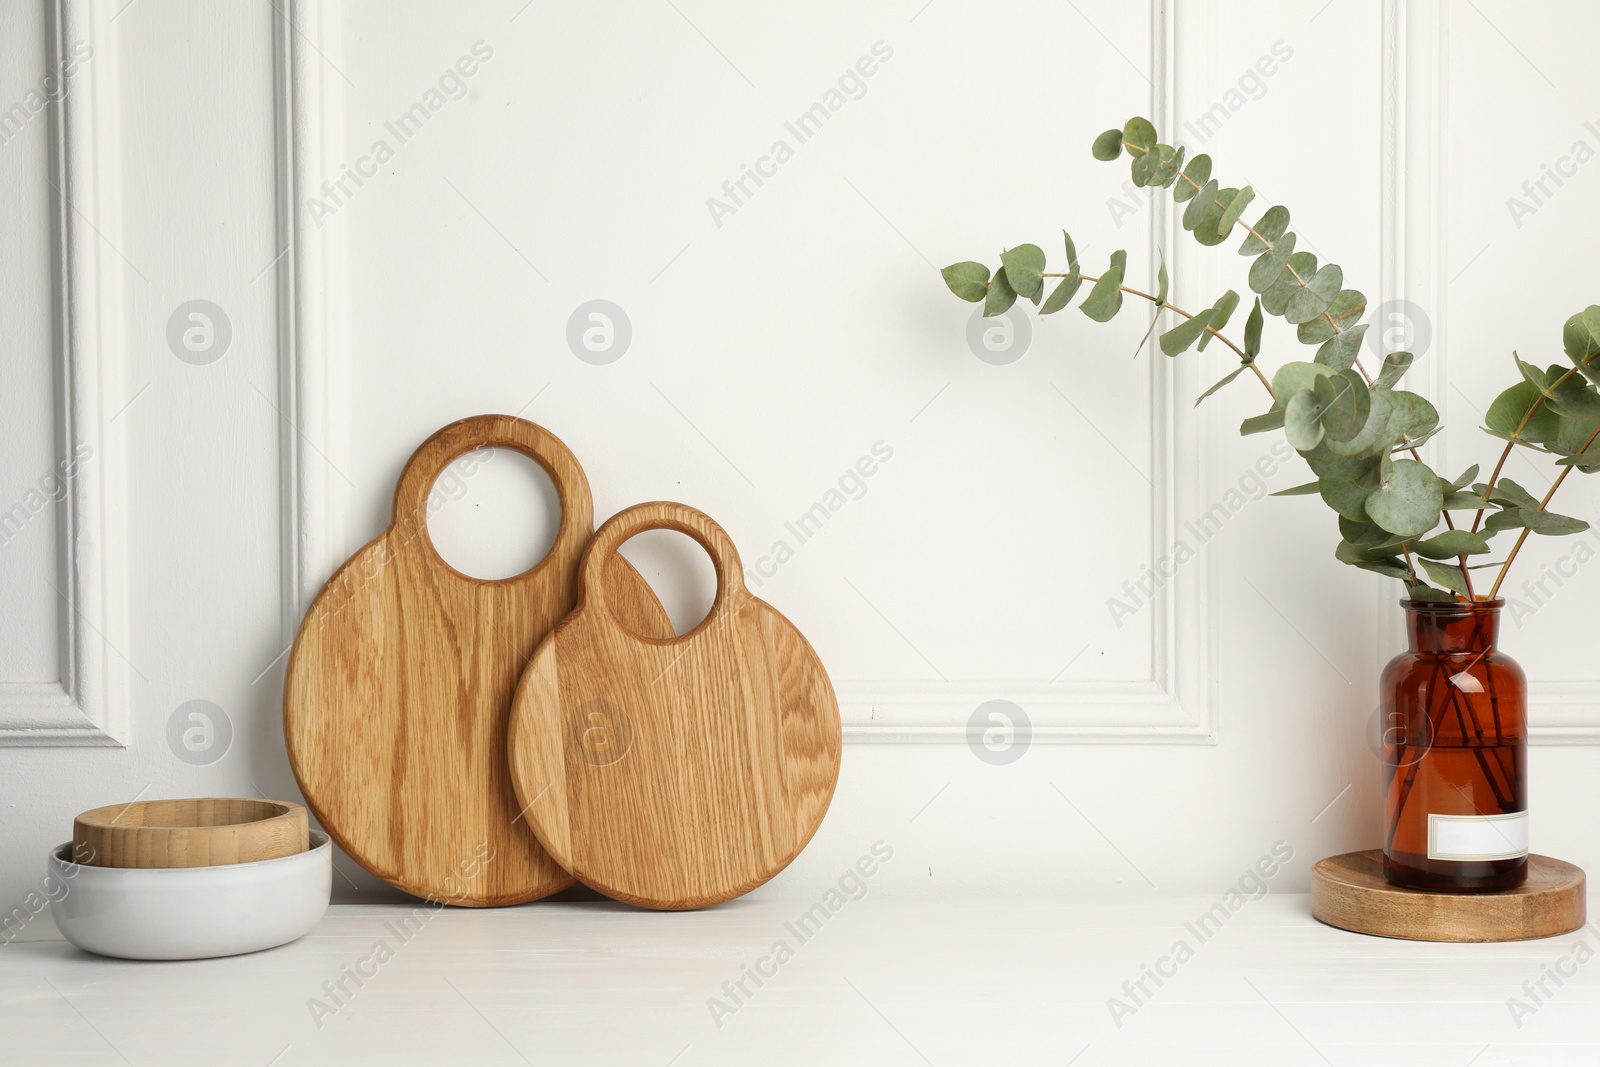 Photo of Wooden cutting boards, bowls and vase with eucalyptus branches on white table